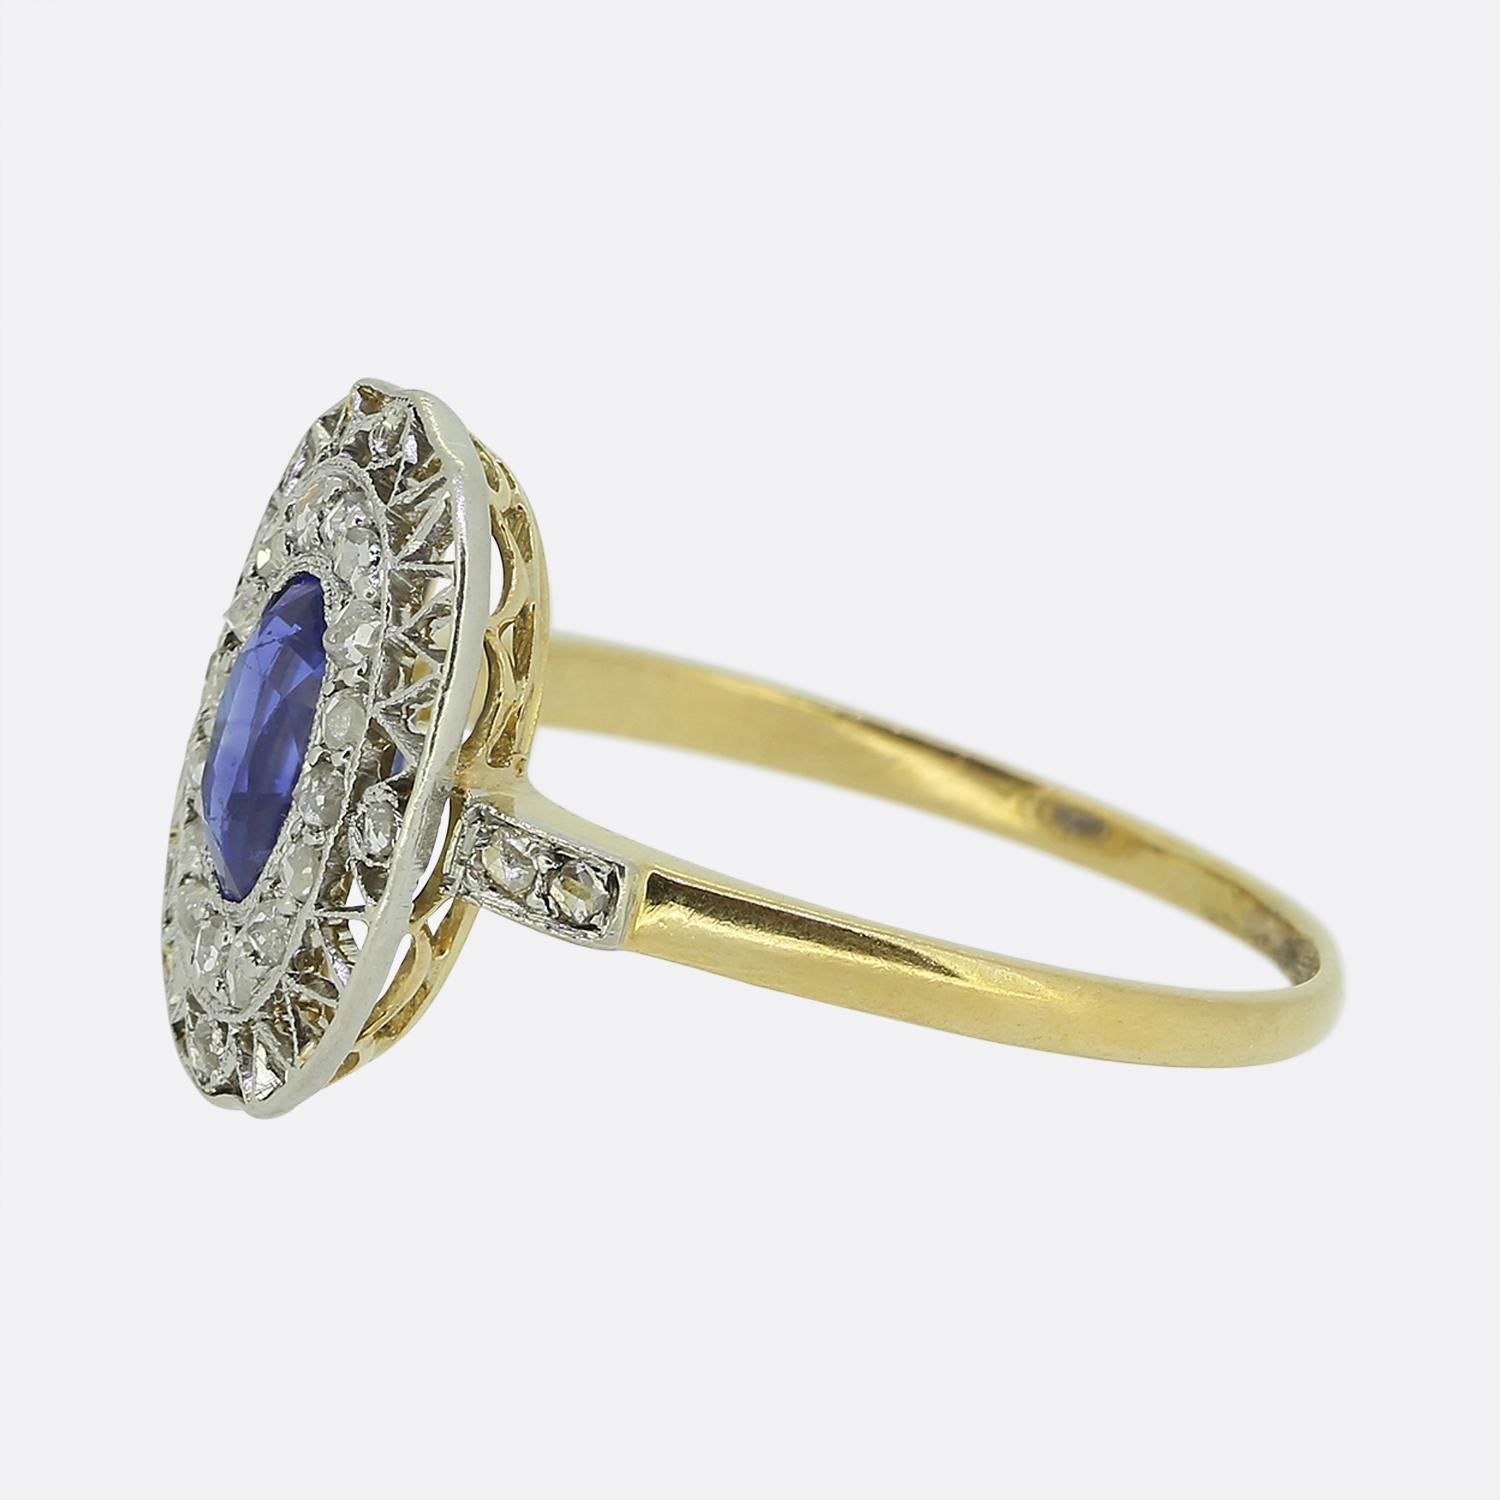 Here we have a delightful sapphire and diamond cluster ring dating back to the Edwardian period. This antique piece showcases a single oval faceted sapphire at the centre of the face. This principal stone possesses a wondrous cornflower blue colour